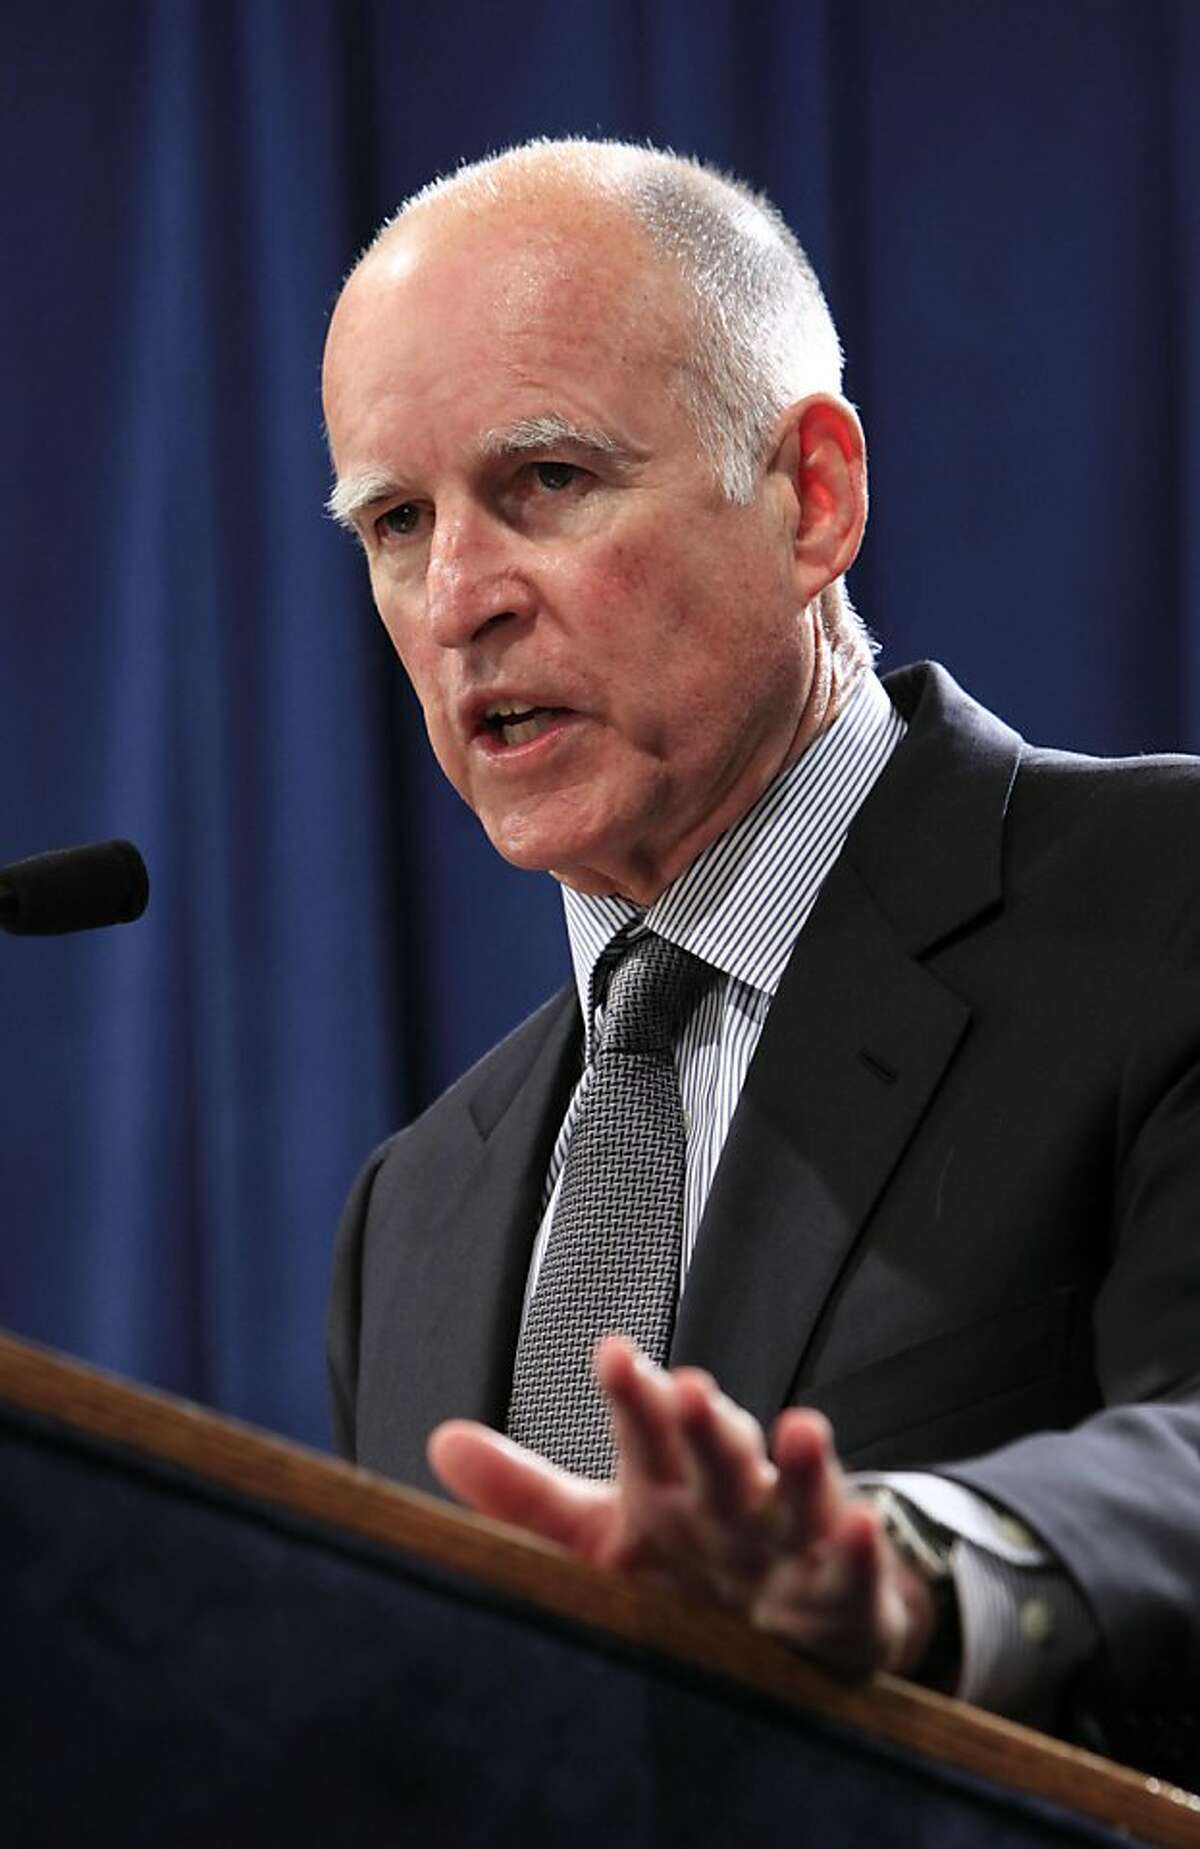 Gov. Jerry Brown discusses his prison realignment plan during a Capitol news conference in Sacramento, Calif., Thursday, Sept. 29, 2011. Brown's plan, which takes effect Saturday, Oct. 1, is aimed at slashing the state's costs and reducing its prison populations by allowing judges to send non-violent, lower level offenders to county jail for crimes such as property, white collar and drug offenses instead of state prison. (AP Photo/Rich Pedroncelli) Ran on: 10-10-2011 Gov. Jerry Brown's last day to act on more than 140 bills dealt with sensitive areas, such as health care. Ran on: 10-10-2011 Gov. Jerry Brown's last day to act on more than 140 bills dealt with sensitive areas, such as health care. Ran on: 10-10-2011 Gov. Jerry Brown dealt with sensitive areas in wrapping up more than 140 bills.